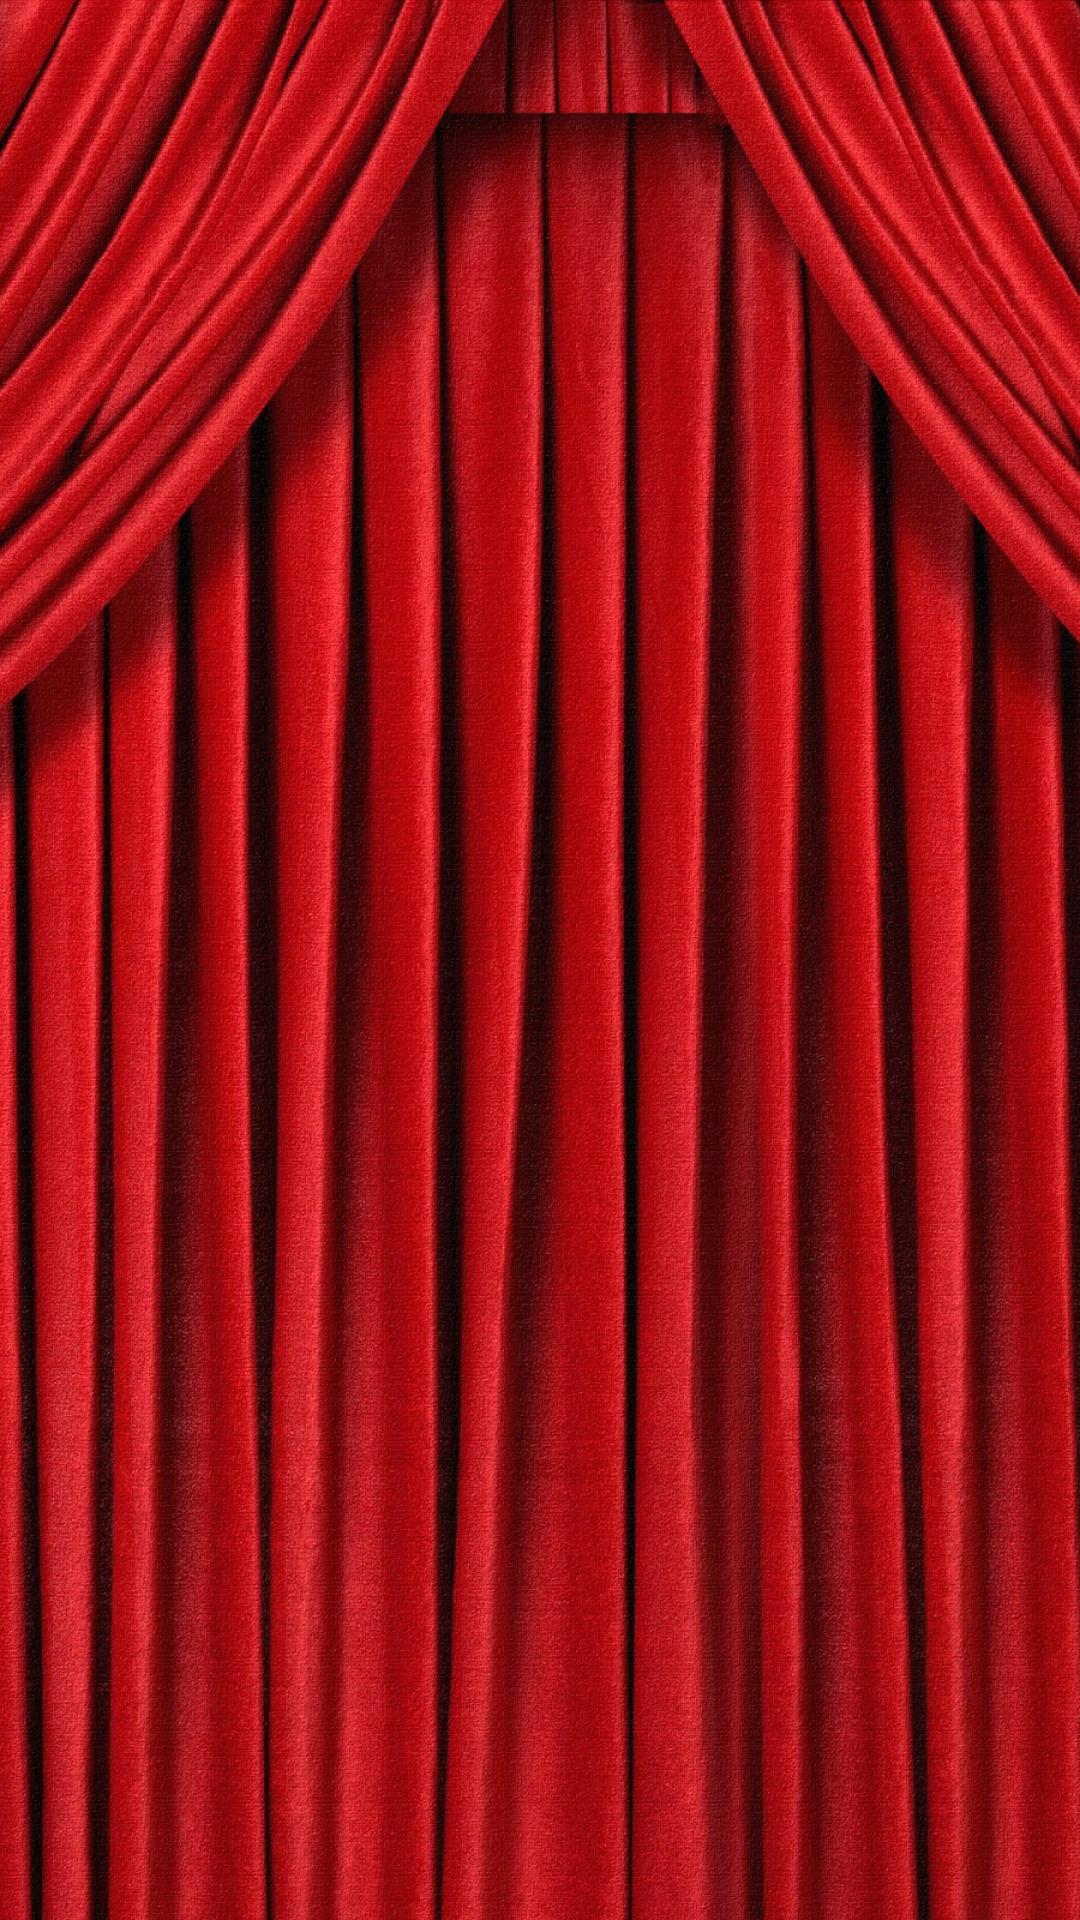 Red Curtain Background Wallpaper